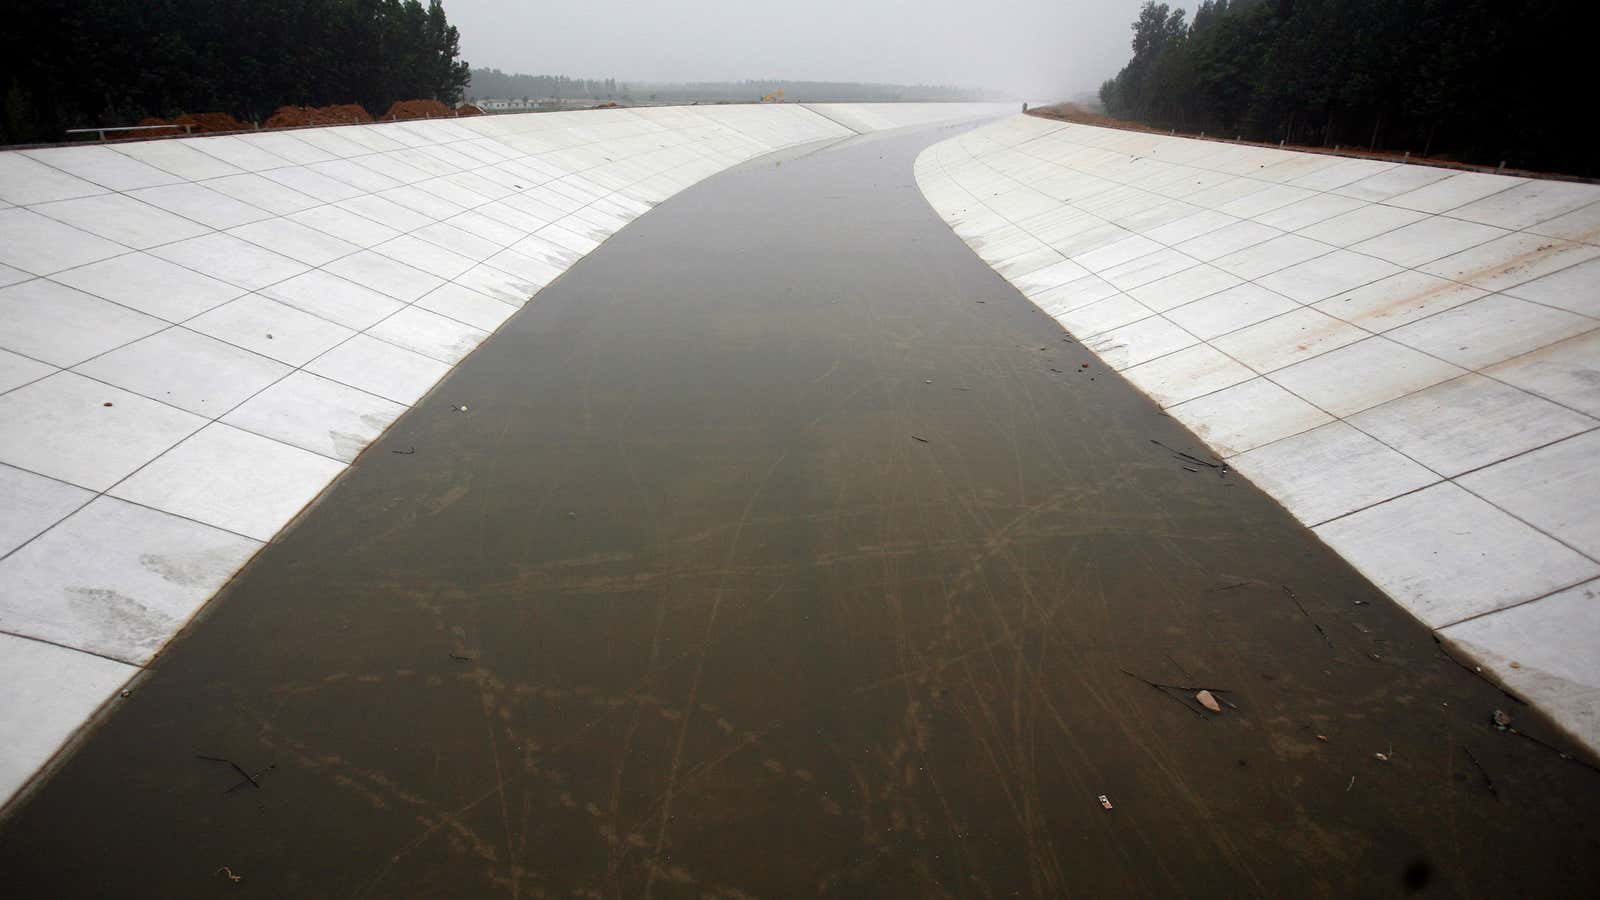 A canal leading to Beijing, part of China’s South North Water Diversion project.